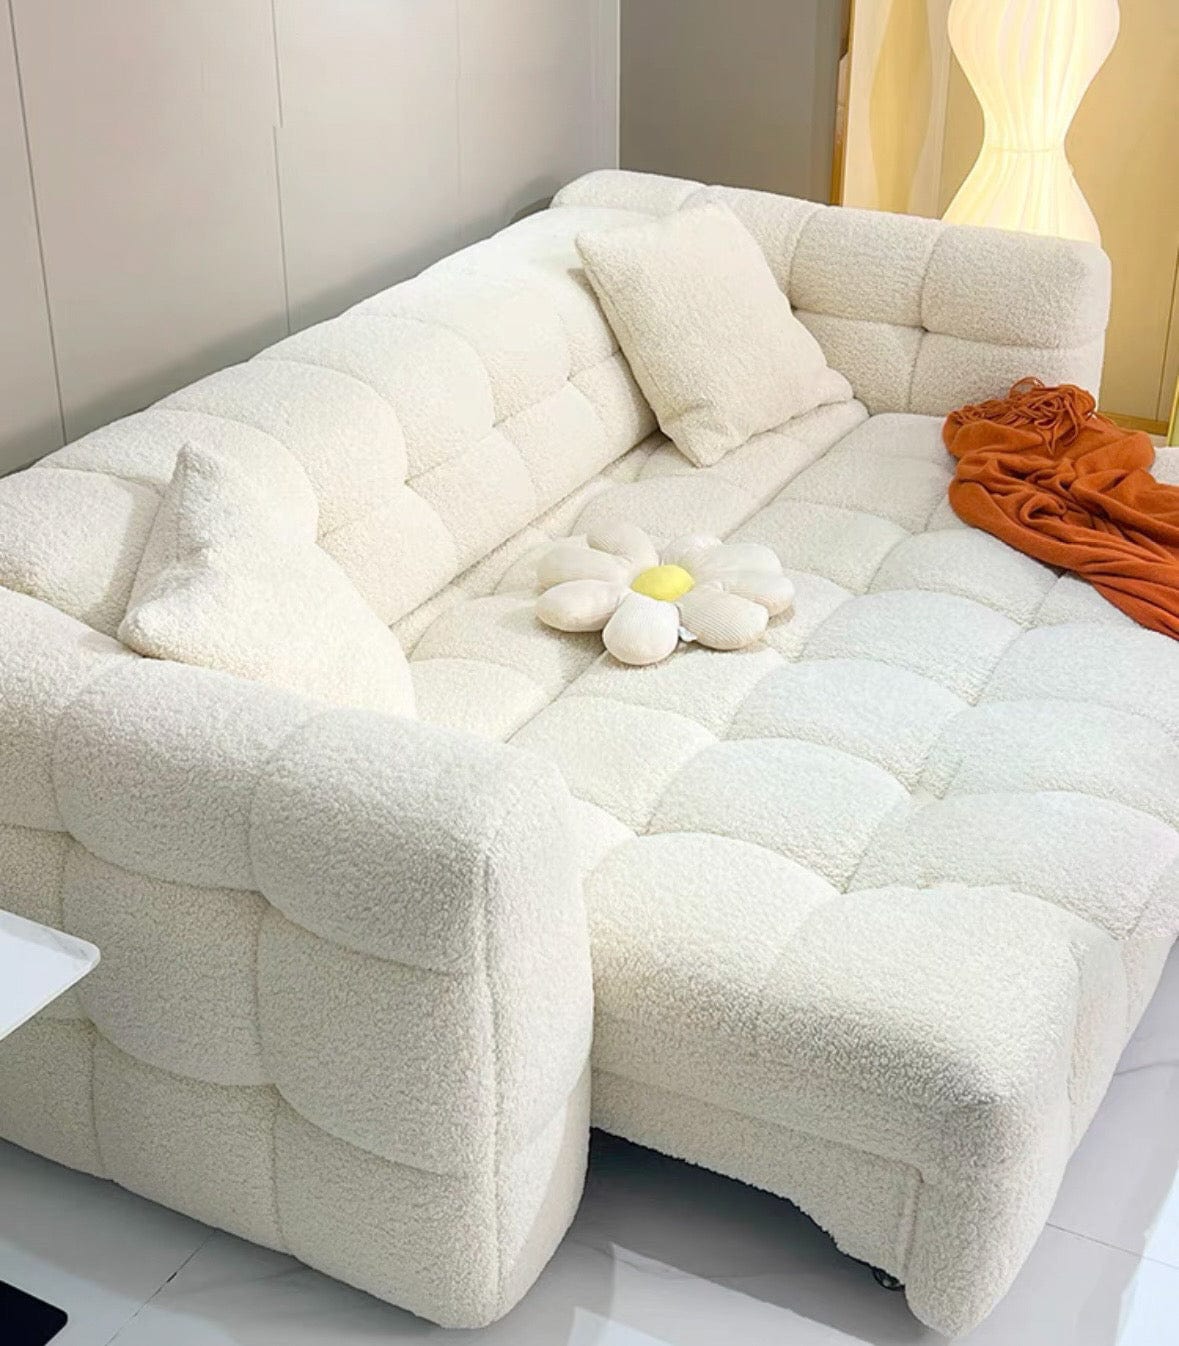 Home Atelier Morris Electric Sofa Bed